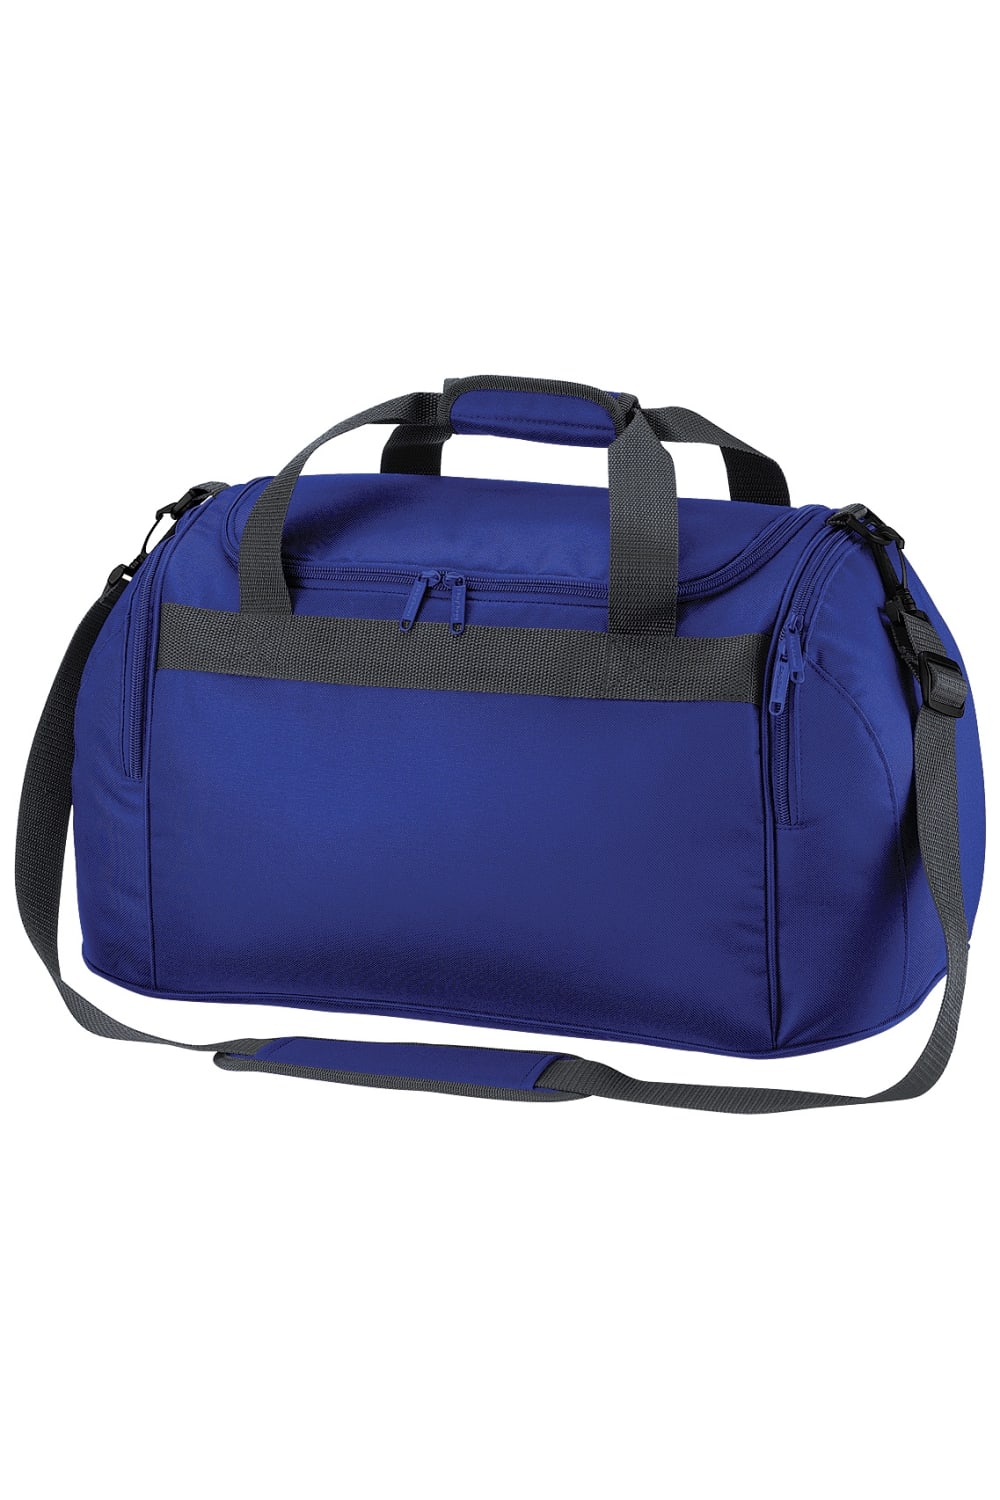 Freestyle Holdall / Duffel Bag (26 Liters) - Bright Royal